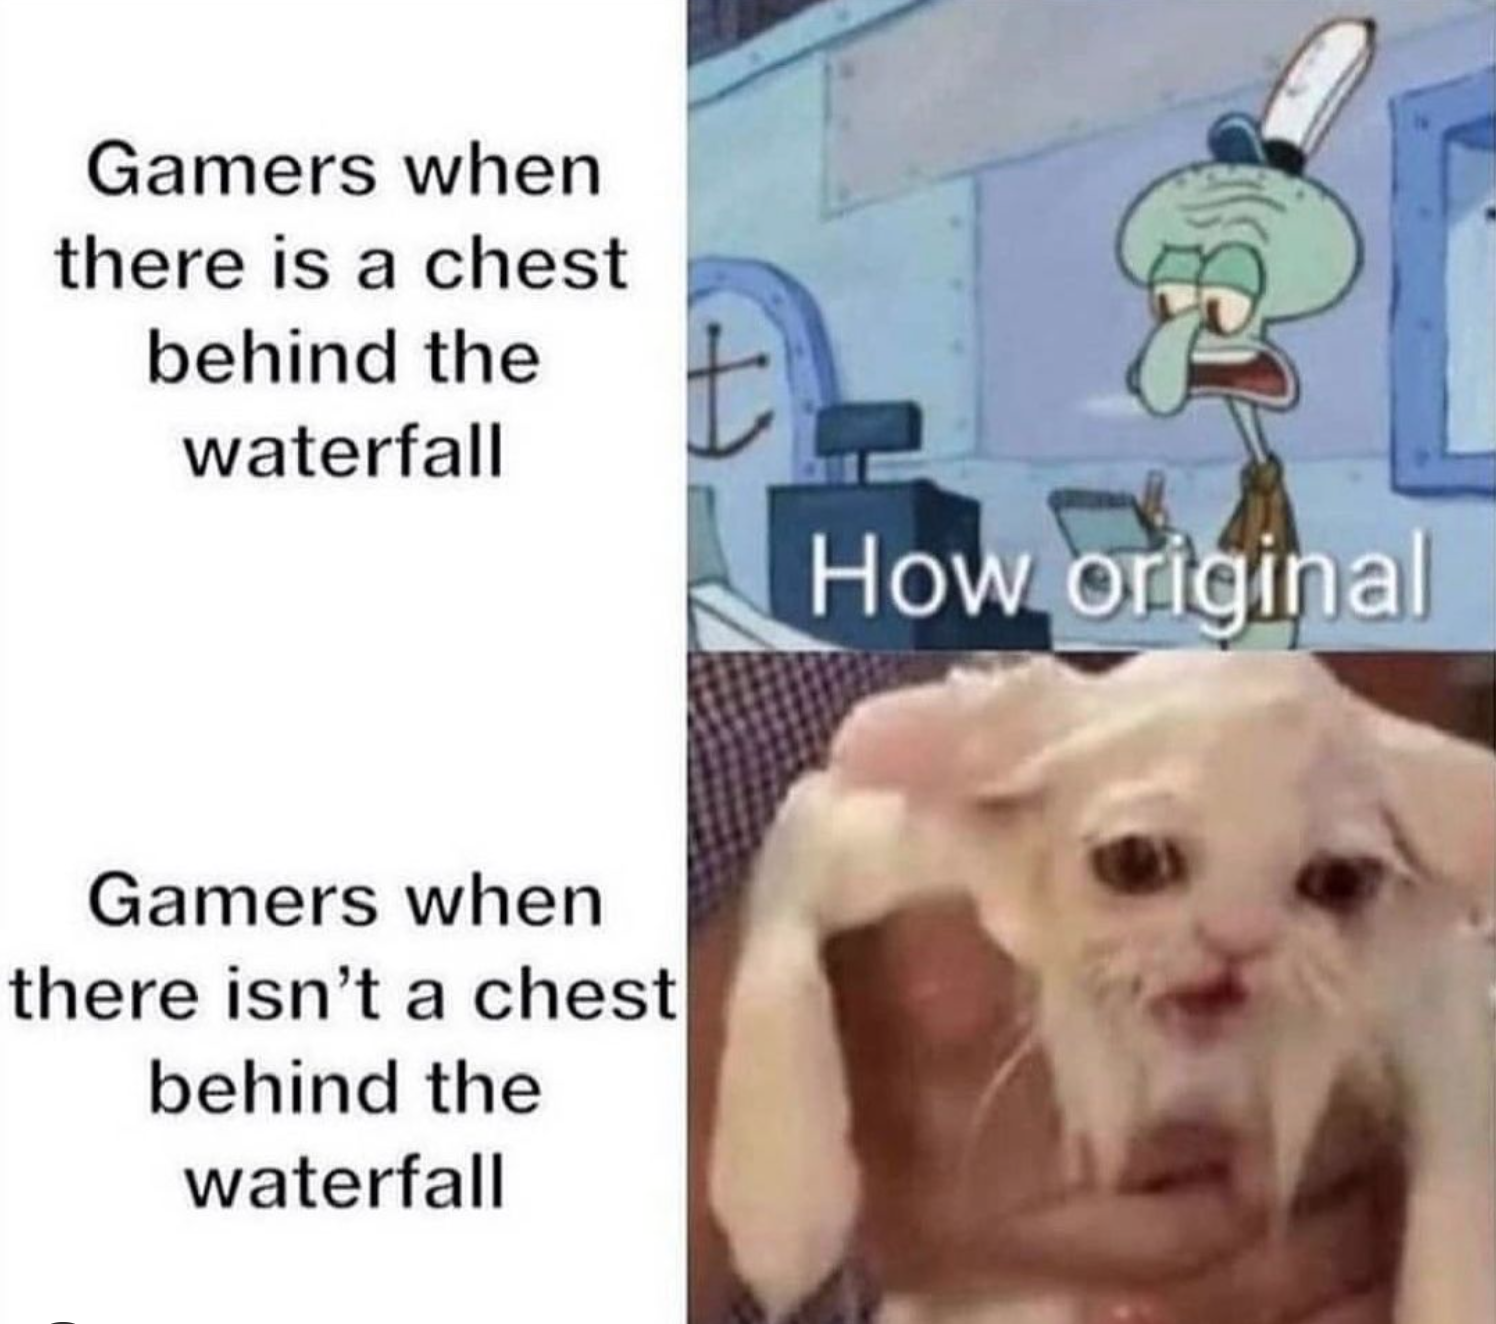 funny gaming memes  - sad cat meme - Gamers when there is a chest behind the waterfall t How original Gamers when there isn't a chest behind the waterfall